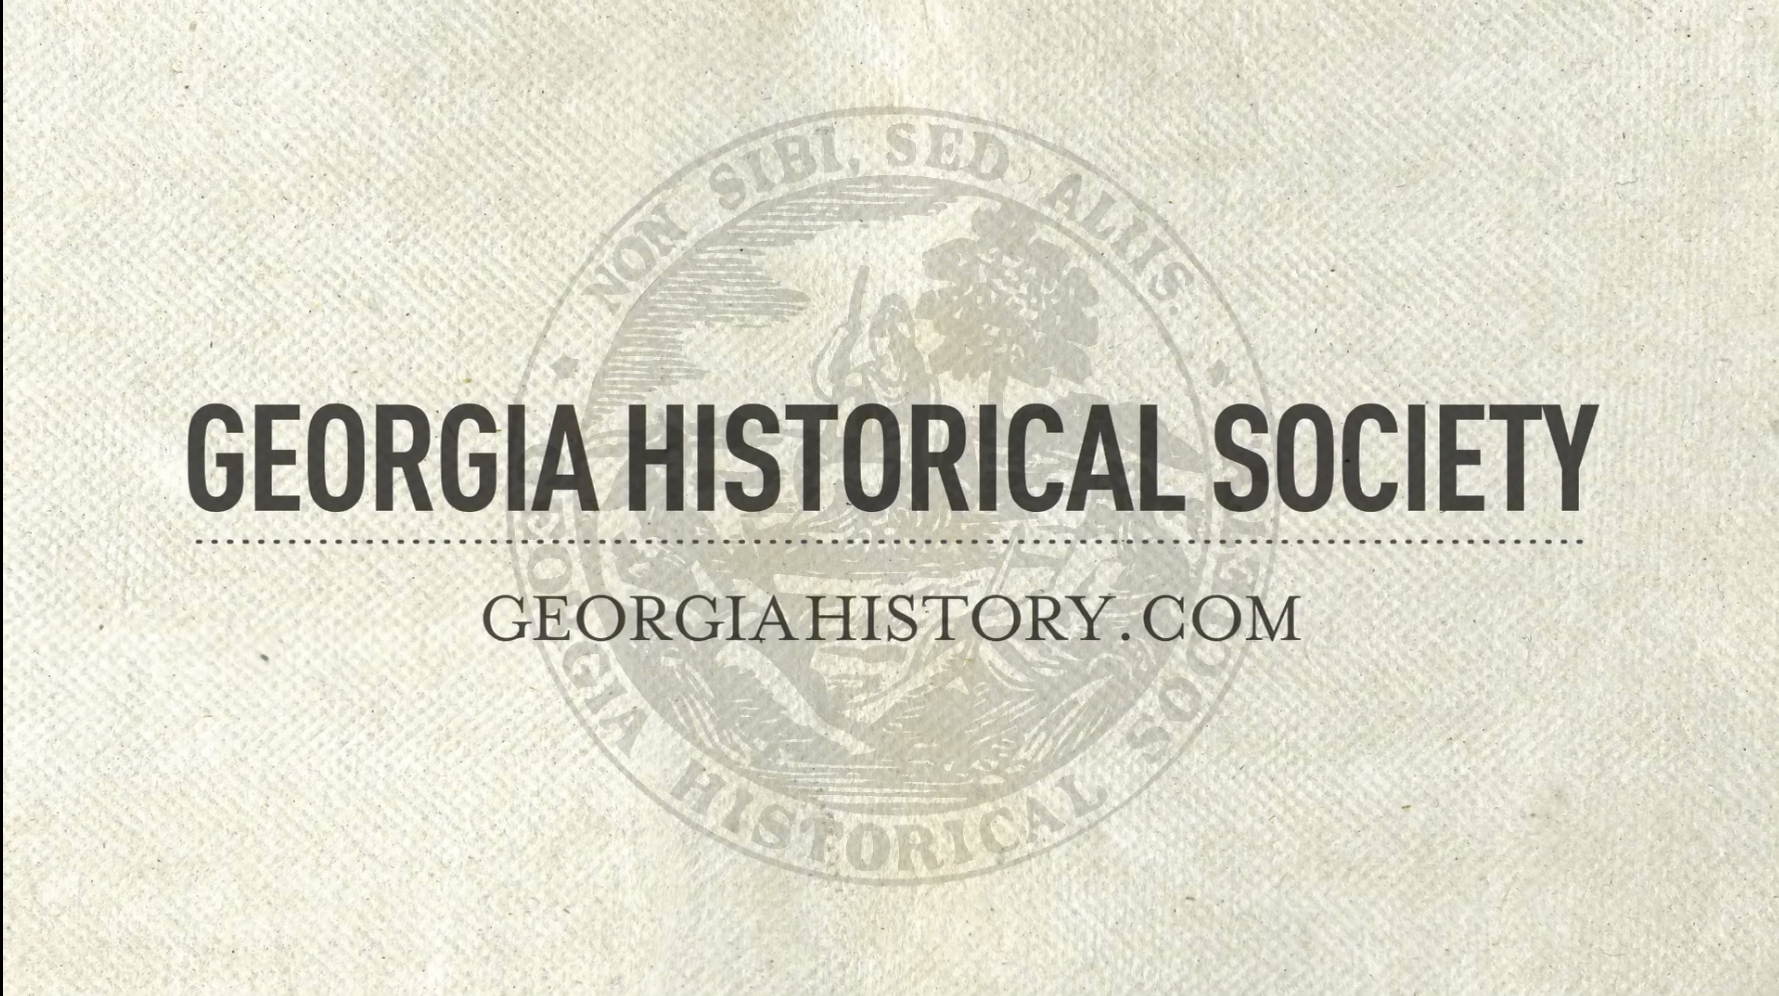 Georgia Historical Society Joins Organizations around the Country Endorsing  the Values of History Relevance - Georgia Historical Society